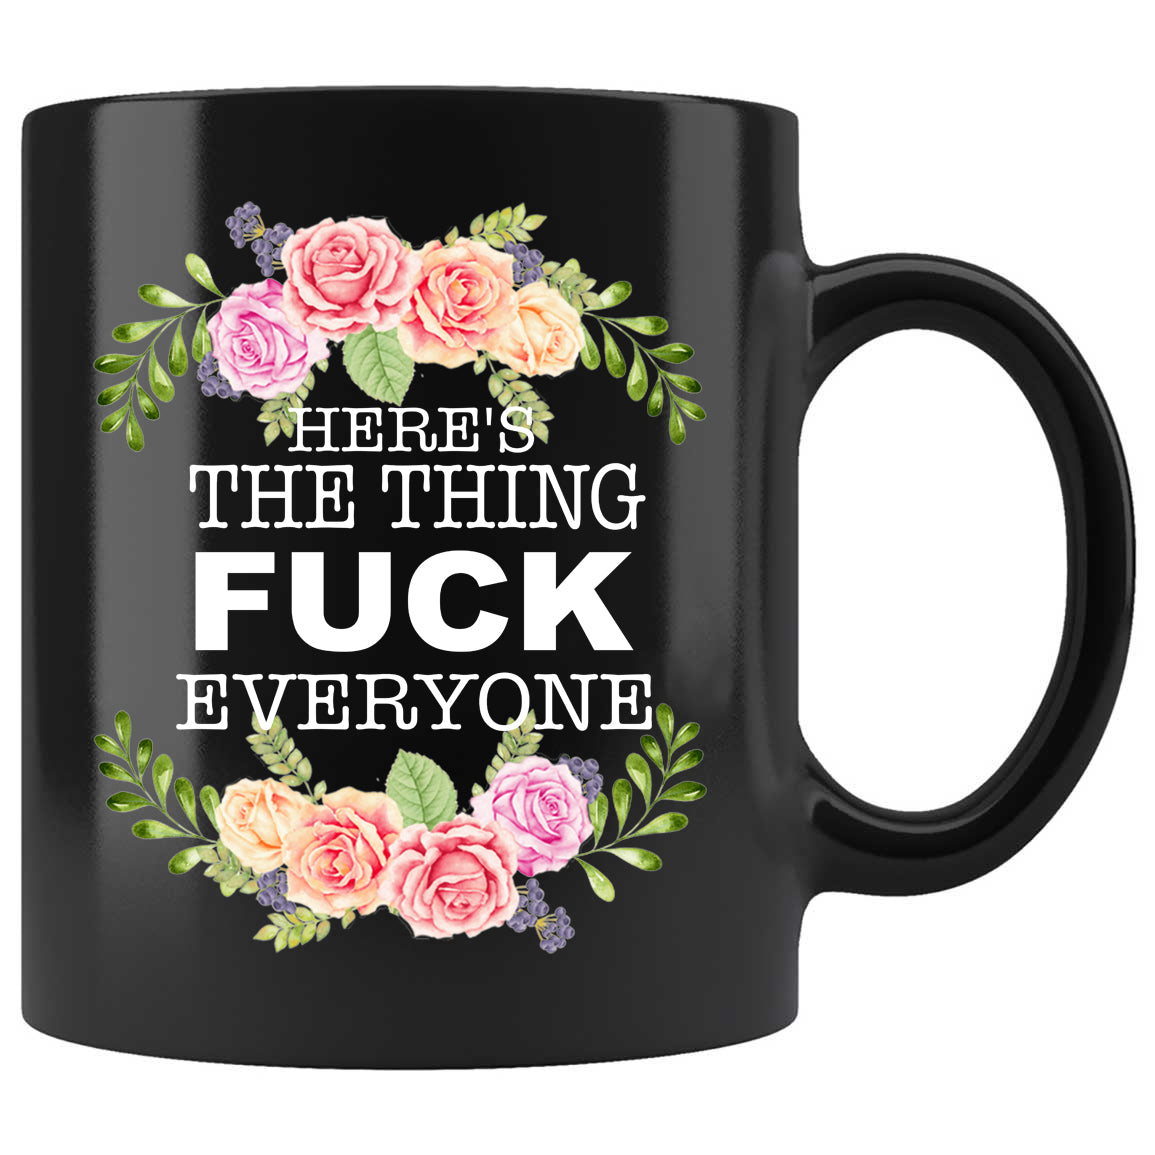 Here'S The Thing Fuck Everyone Skitongifts Funny Ceramic Coffee Mug For Birthday, Mother's Day, Father's Day, Christmas